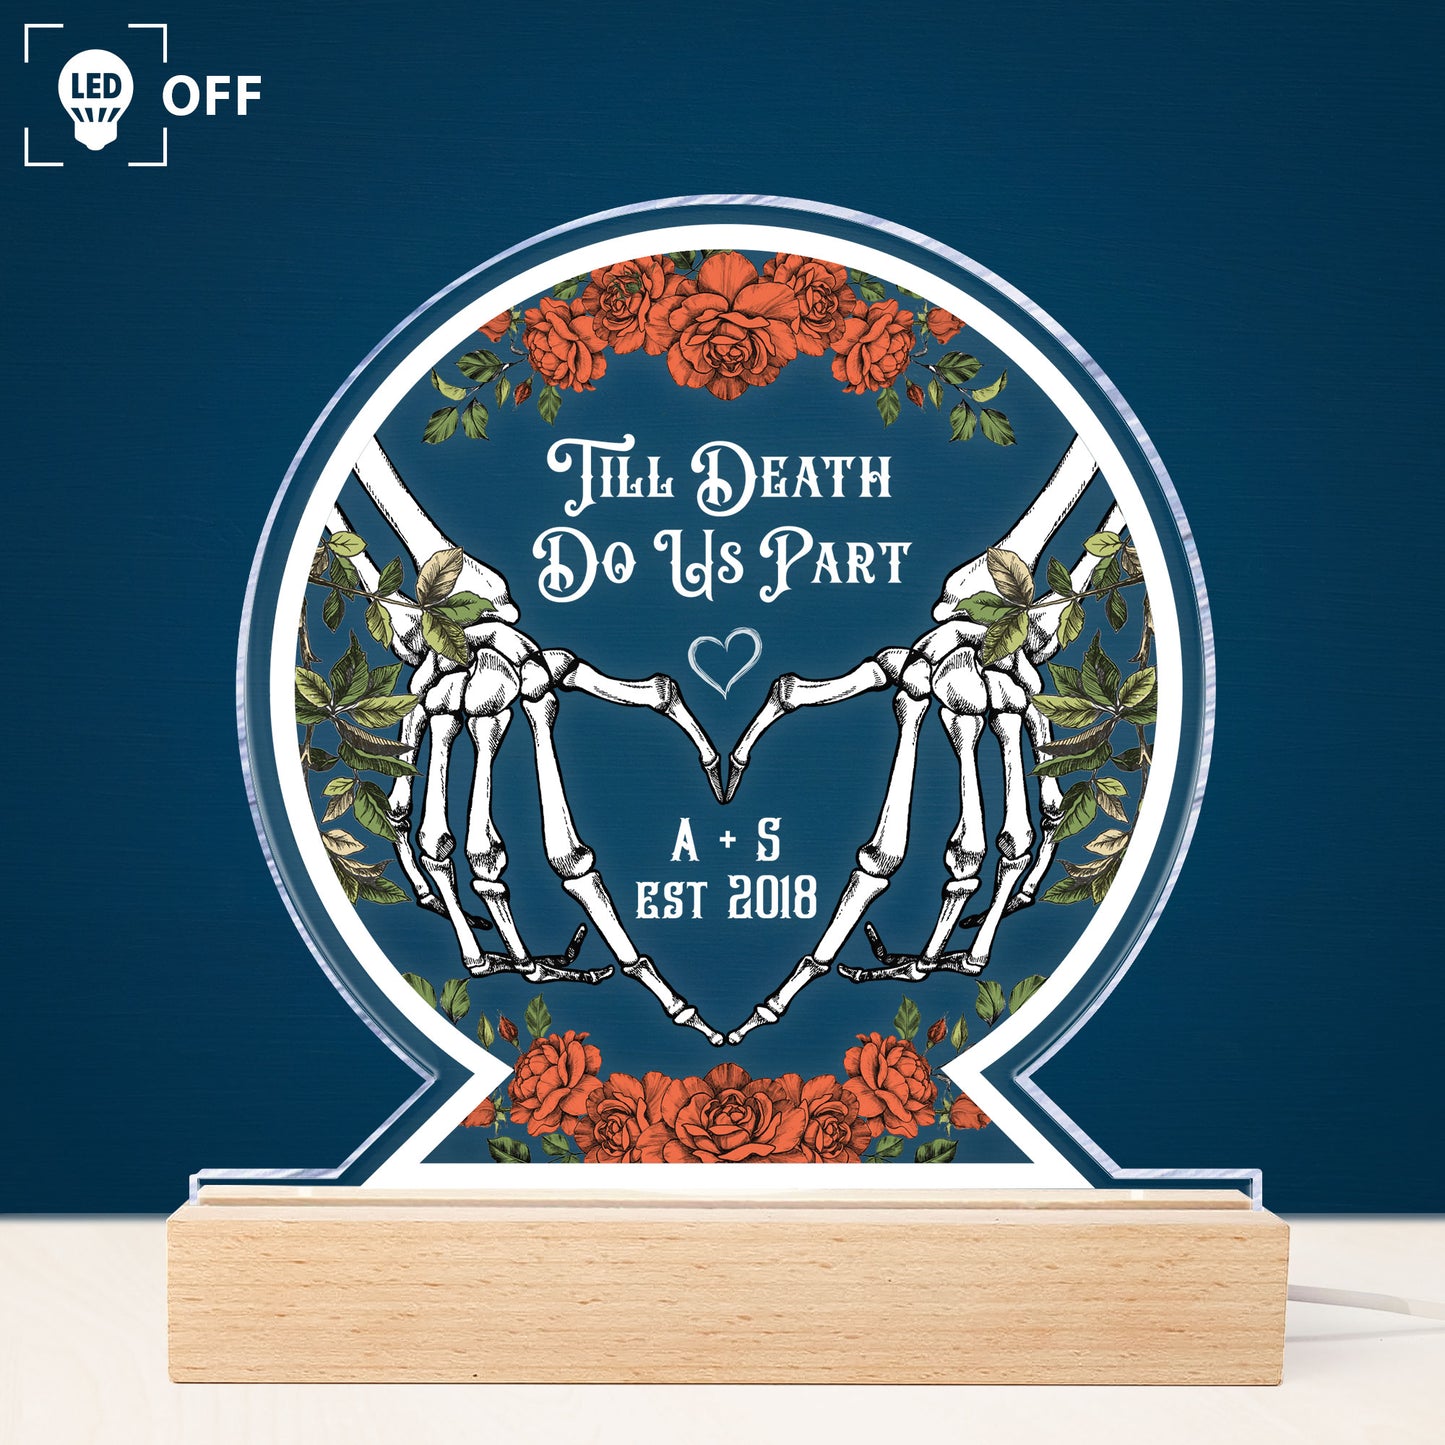 Till Death Do Us Apart - Personalized LED Light